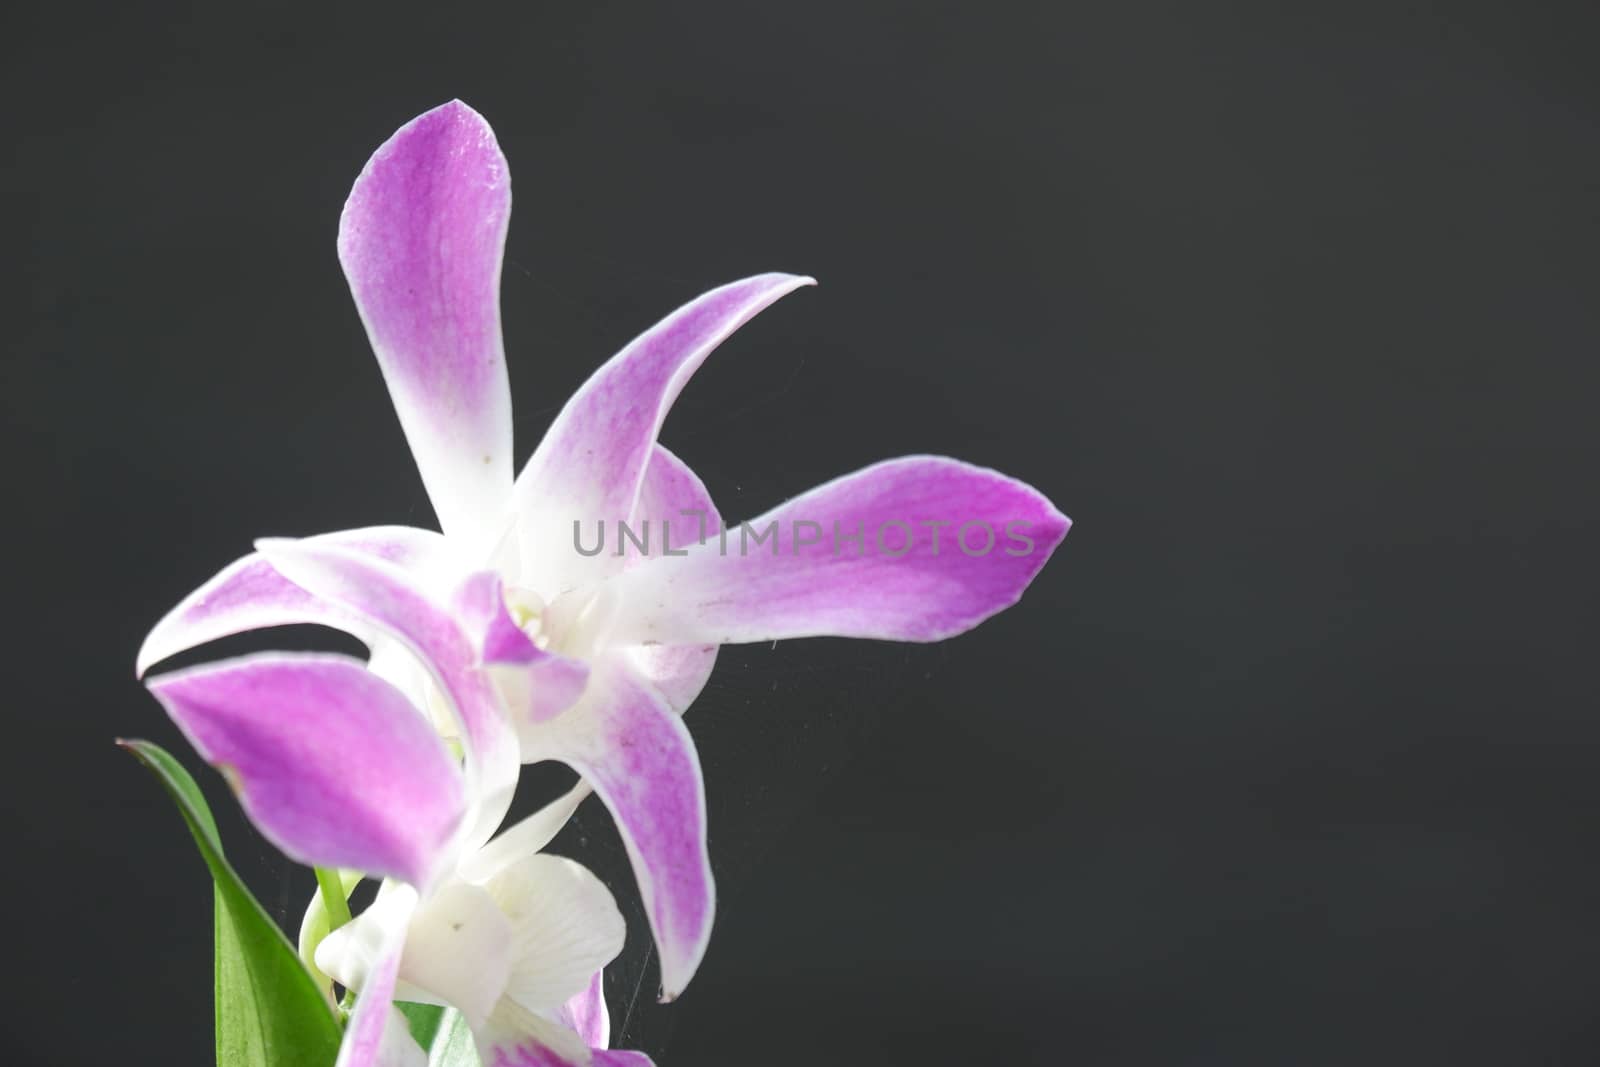 beautiful dendrobium orchid, a combination of bright white and purple by pengejarsenja